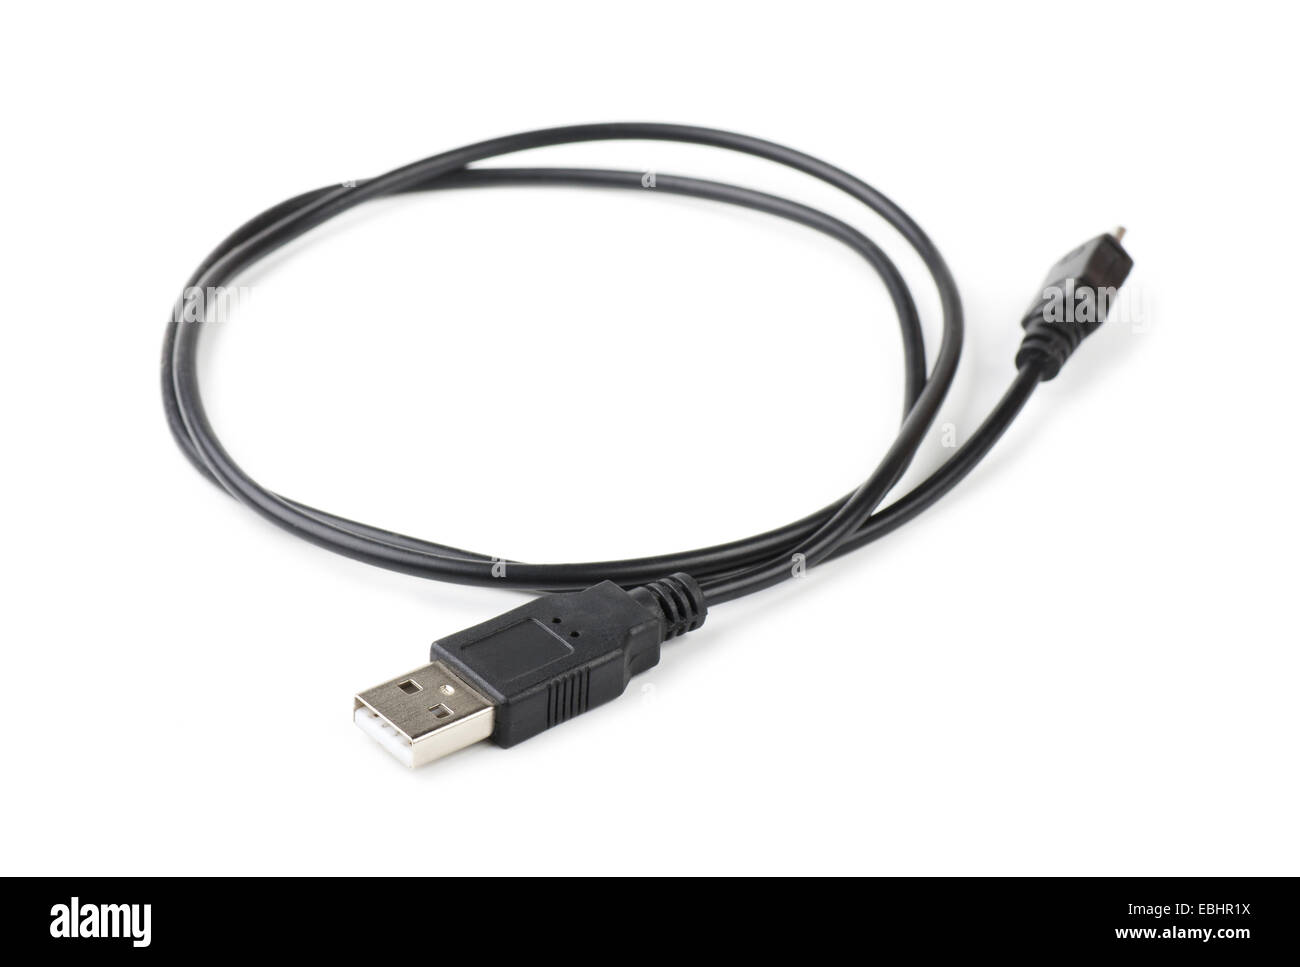 Usb cable on a white background Stock Photo